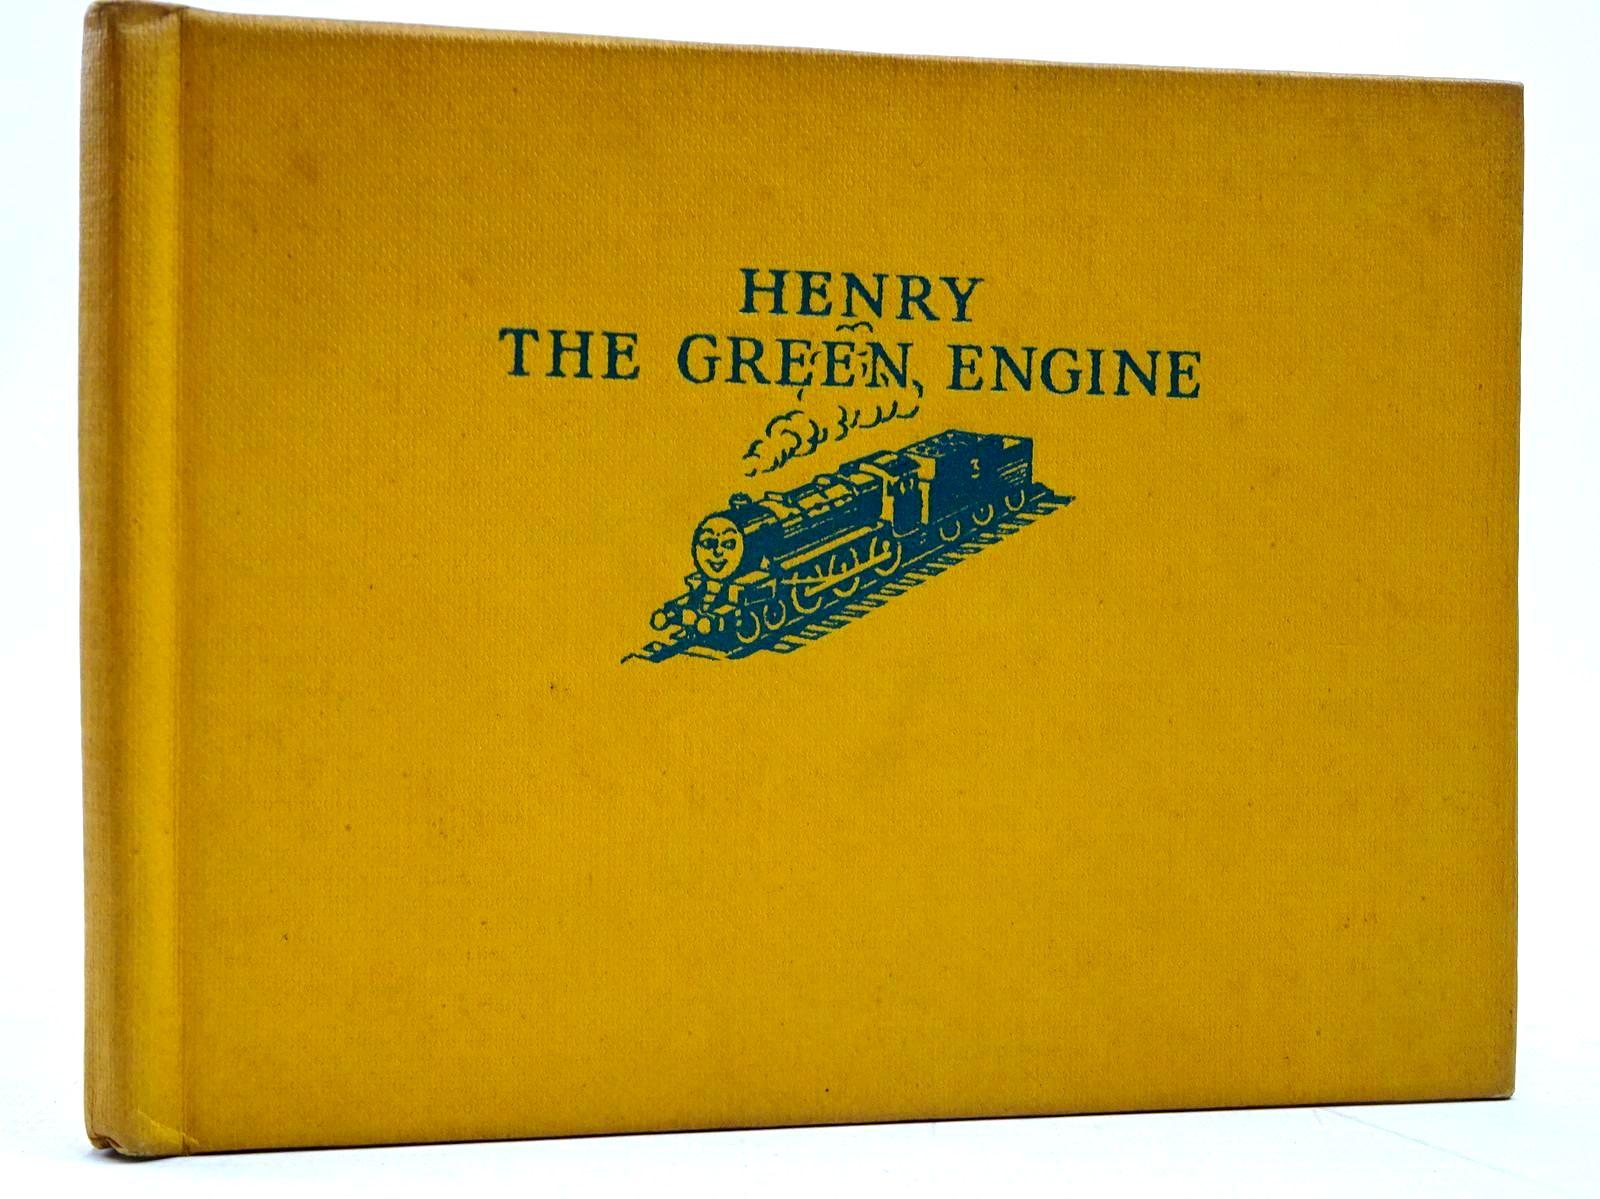 Stella Rose S Books Henry The Green Engine Written By Rev W